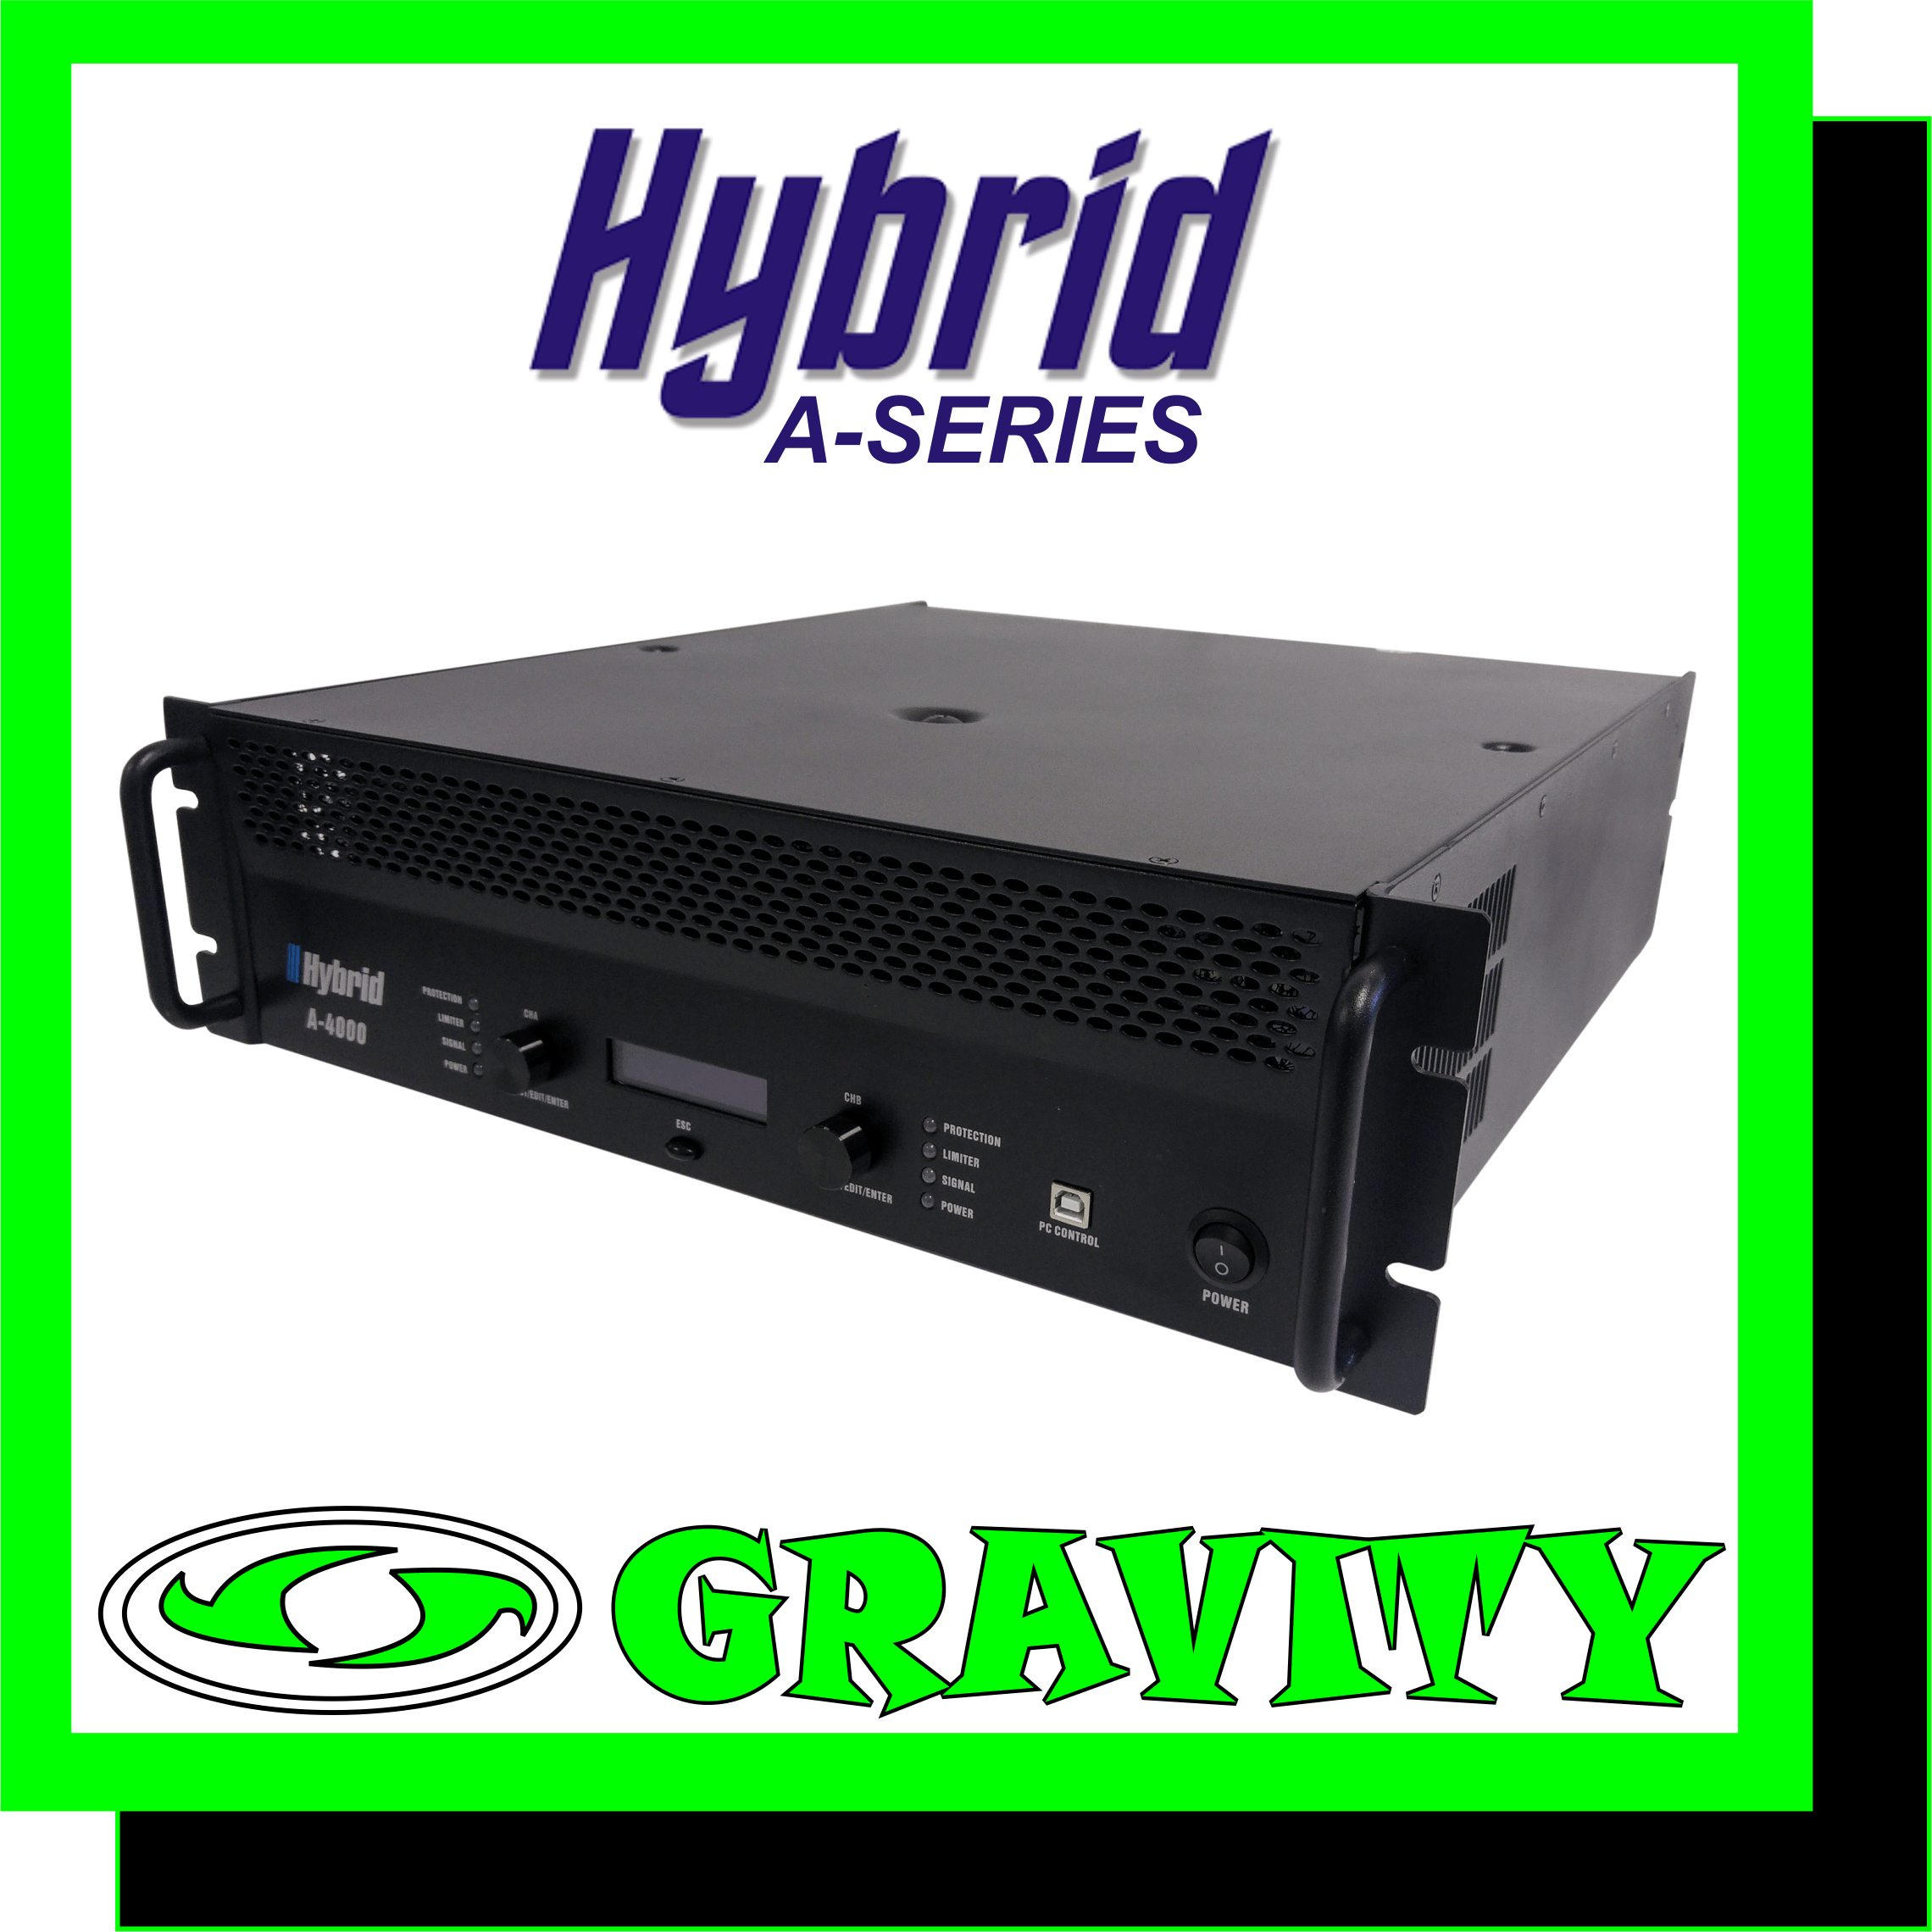 Hybrid A4000MK5 Power Amplifier with DSP  8Ohm Stereo Power . RMS/CH 1000W 4Ohm Stereo Power . RMS/CH 2000W 8Ohm Bridged Mono Power . RMS 3000W 4Ohm Bridged Mono Power . RMS 3900W  Frequency Response (+/- 3dB . 1W/8O) 20Hz 20KHz +/- 1dB Protection DC Protection . Short Circuit Protection . Thermal Protection . Inrush Current Protection . Soft Start Portection . Input & Overload Protection THD+N (20Hz-20KHz) <0.5% Damping Factor (1KHz @ 8O) >600 Hum & Noise(A weighted . -80dBW) 95dB Input Impedance (Balanced / Unbalanced) 20K Ohm / 10K Ohm Crosstalk (20Hz-20KHz Rated Power 8O) >60dB Cooling 2 x Fans . Dual speed . Rear to Front Airflow  Input Connectors Jack/Female XLR Neutrik Combo + Male XLR Neutrik Output Connectors 3 x Neutrik Speakon Dimensions (WxHxD) mm 482 x 489 x 132 Weight Kg 34